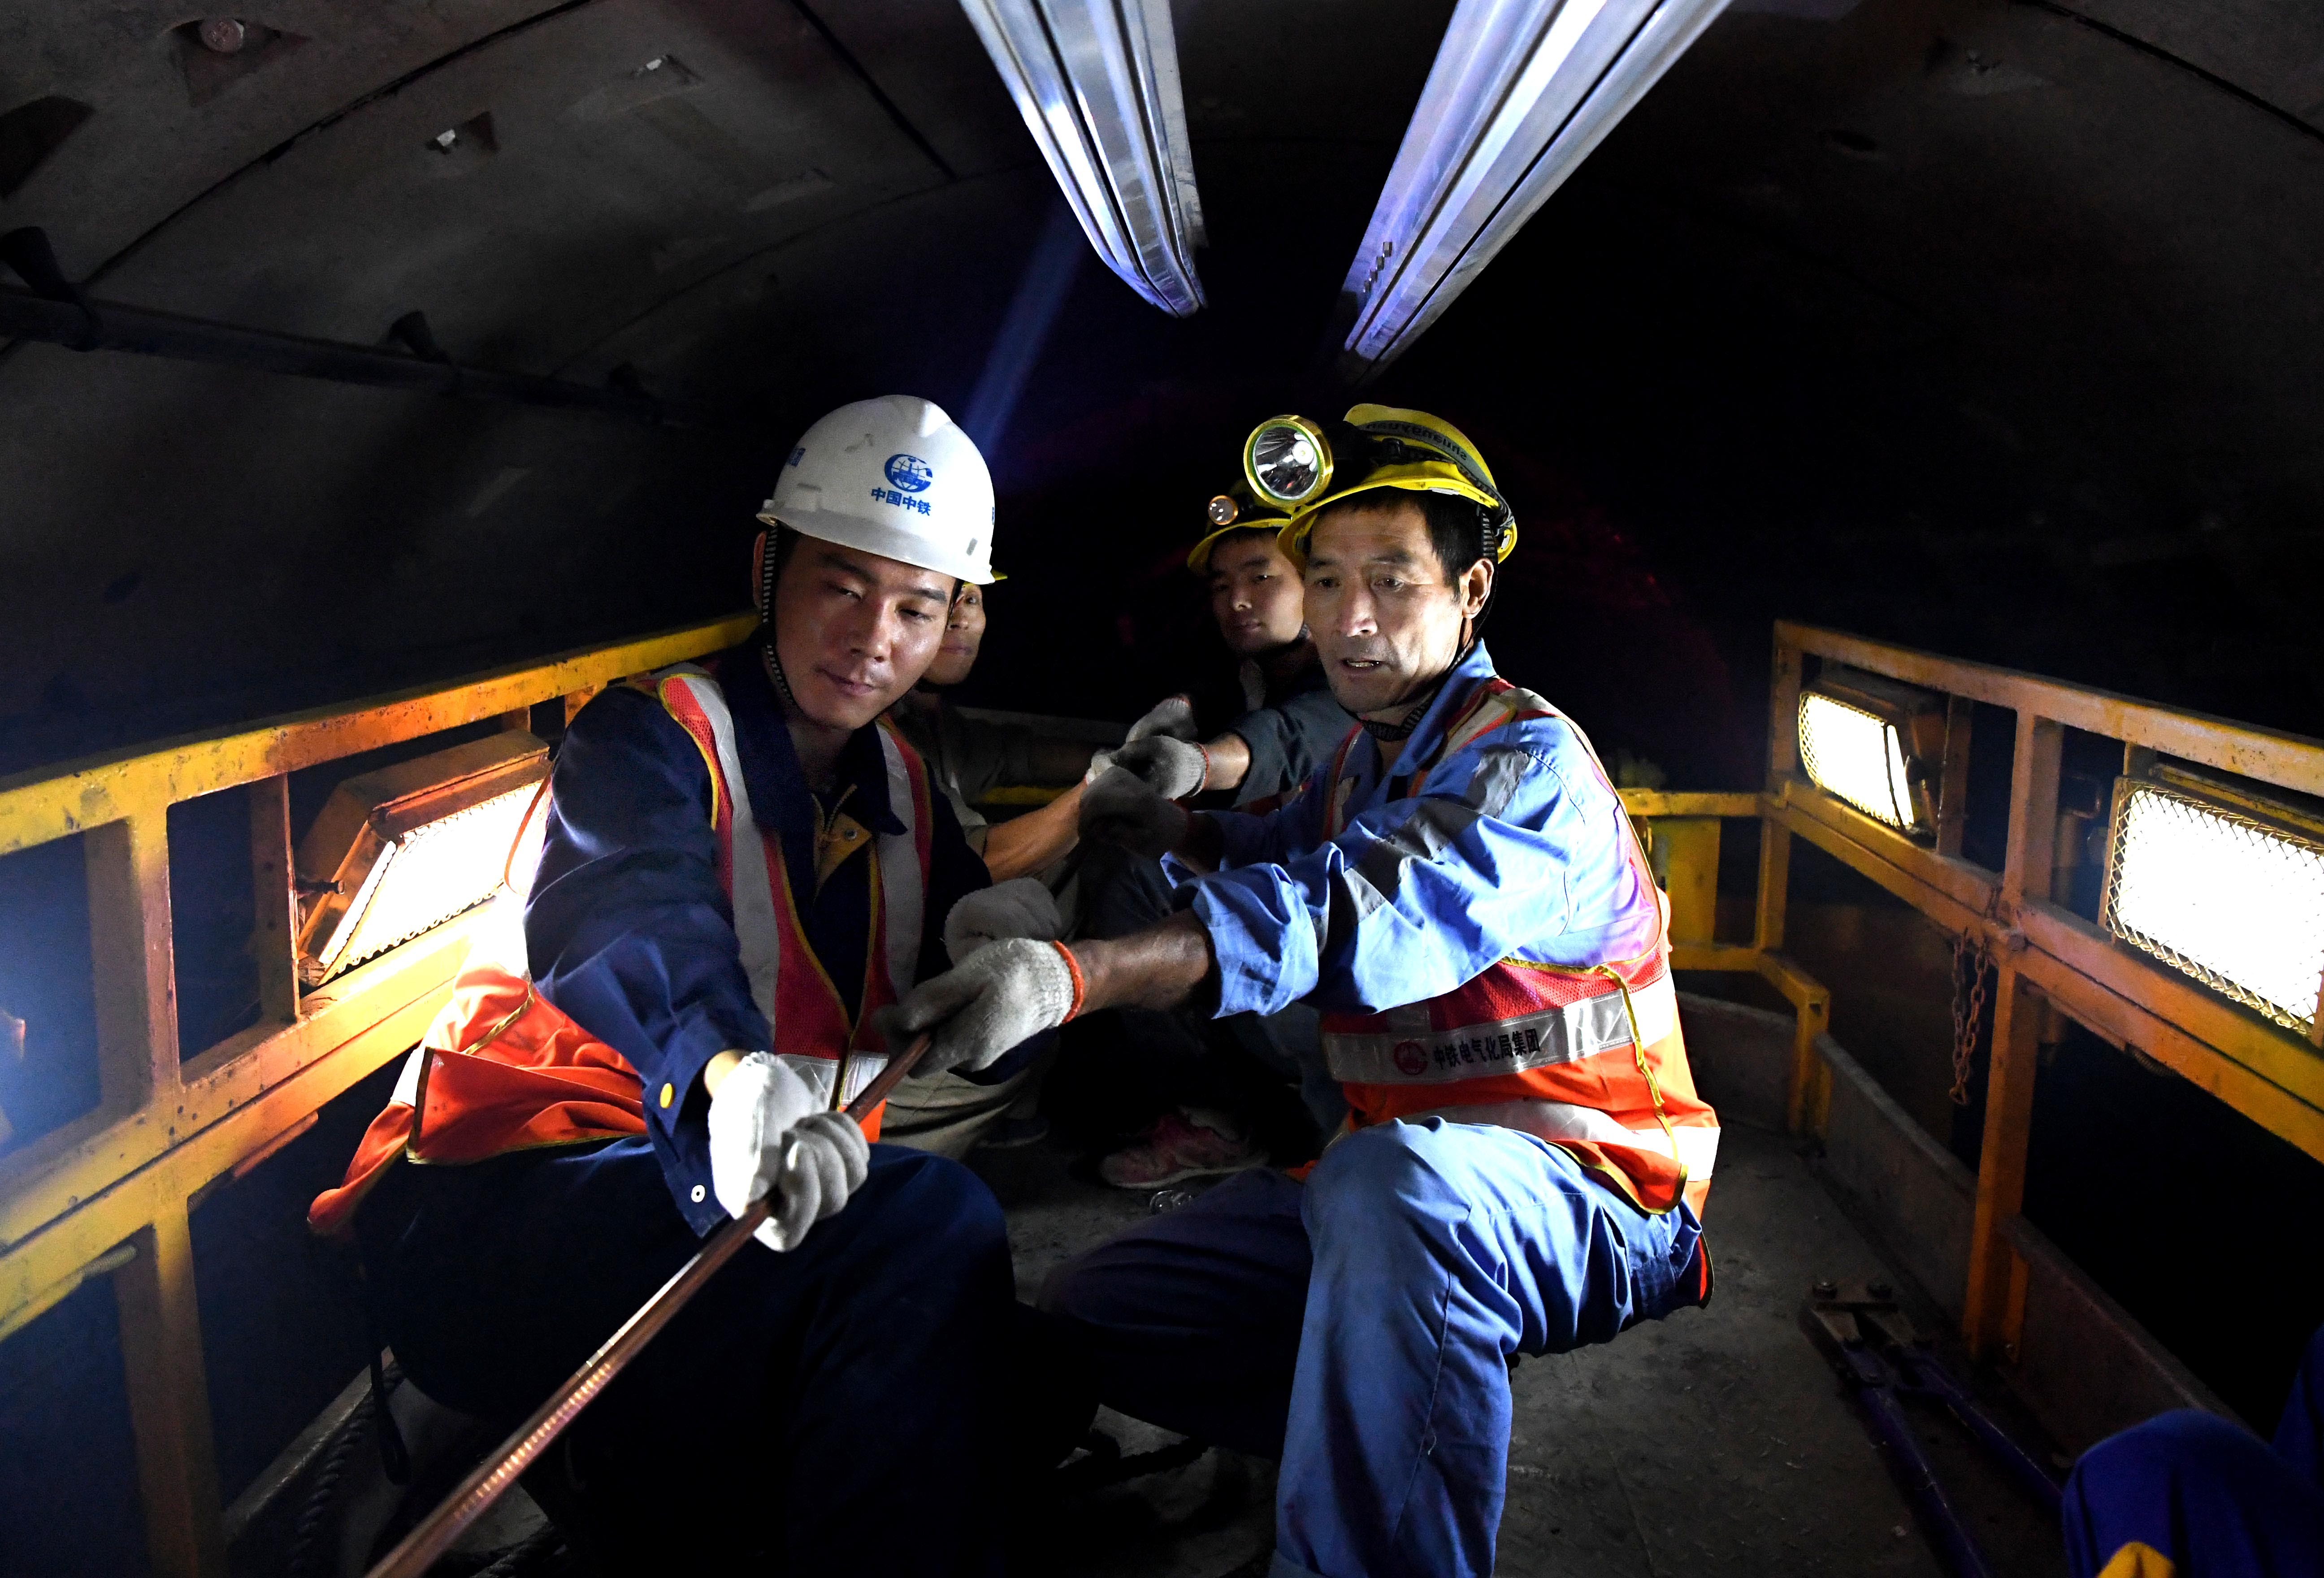 Workers at the Line 5 construction site in Zhengzhou, Henan province last week. Beijing has resumed approving new subway projects. Photo: Xinhua